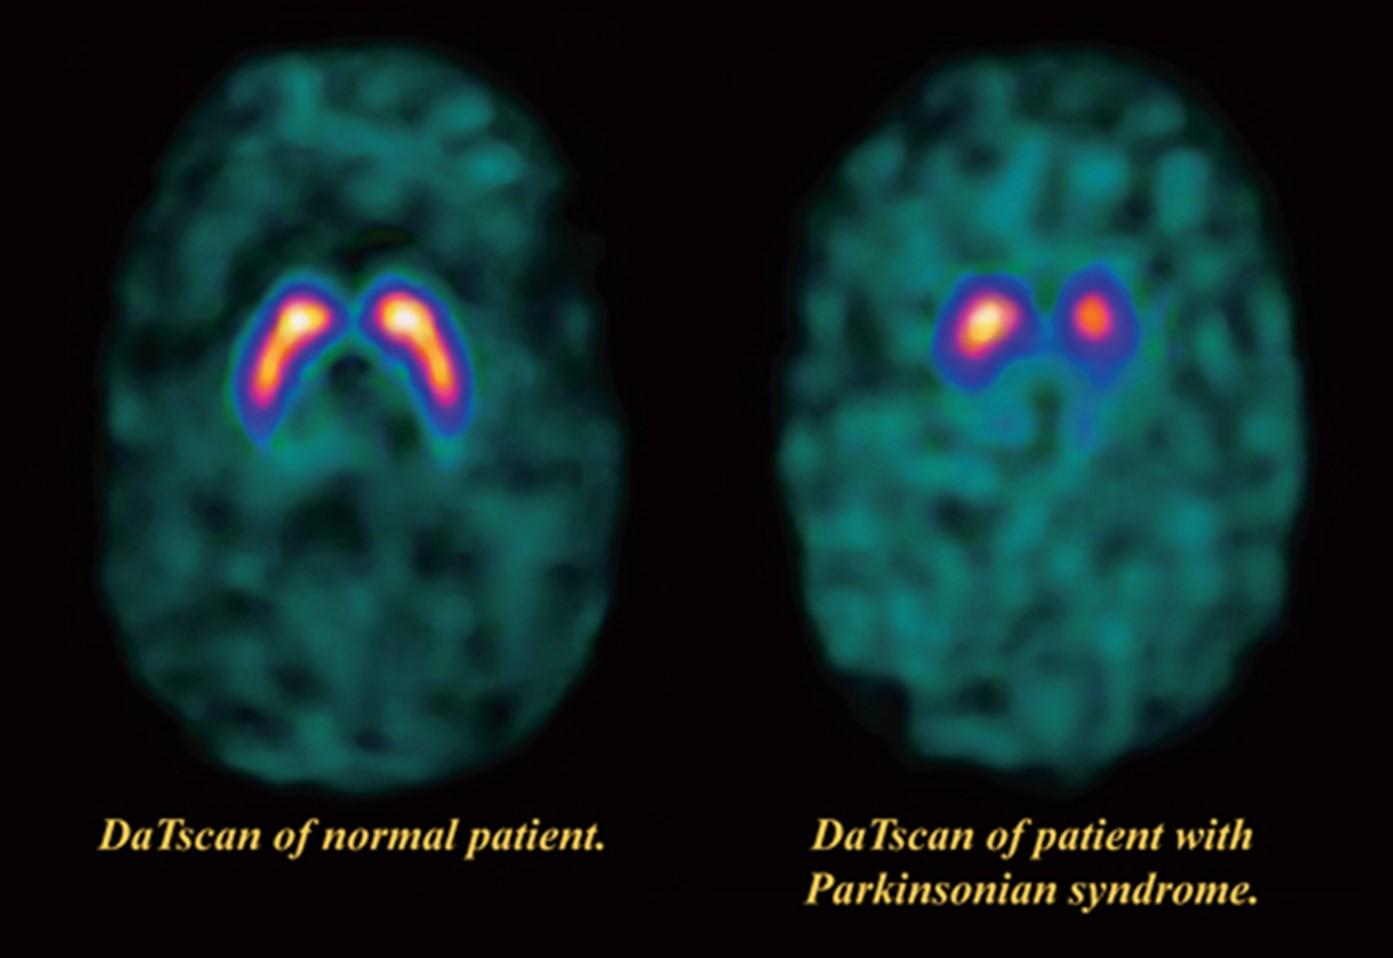 DaTscan imagery comparing the DaTscan of a normal patient with that of a patient with Parkinson's disease. 